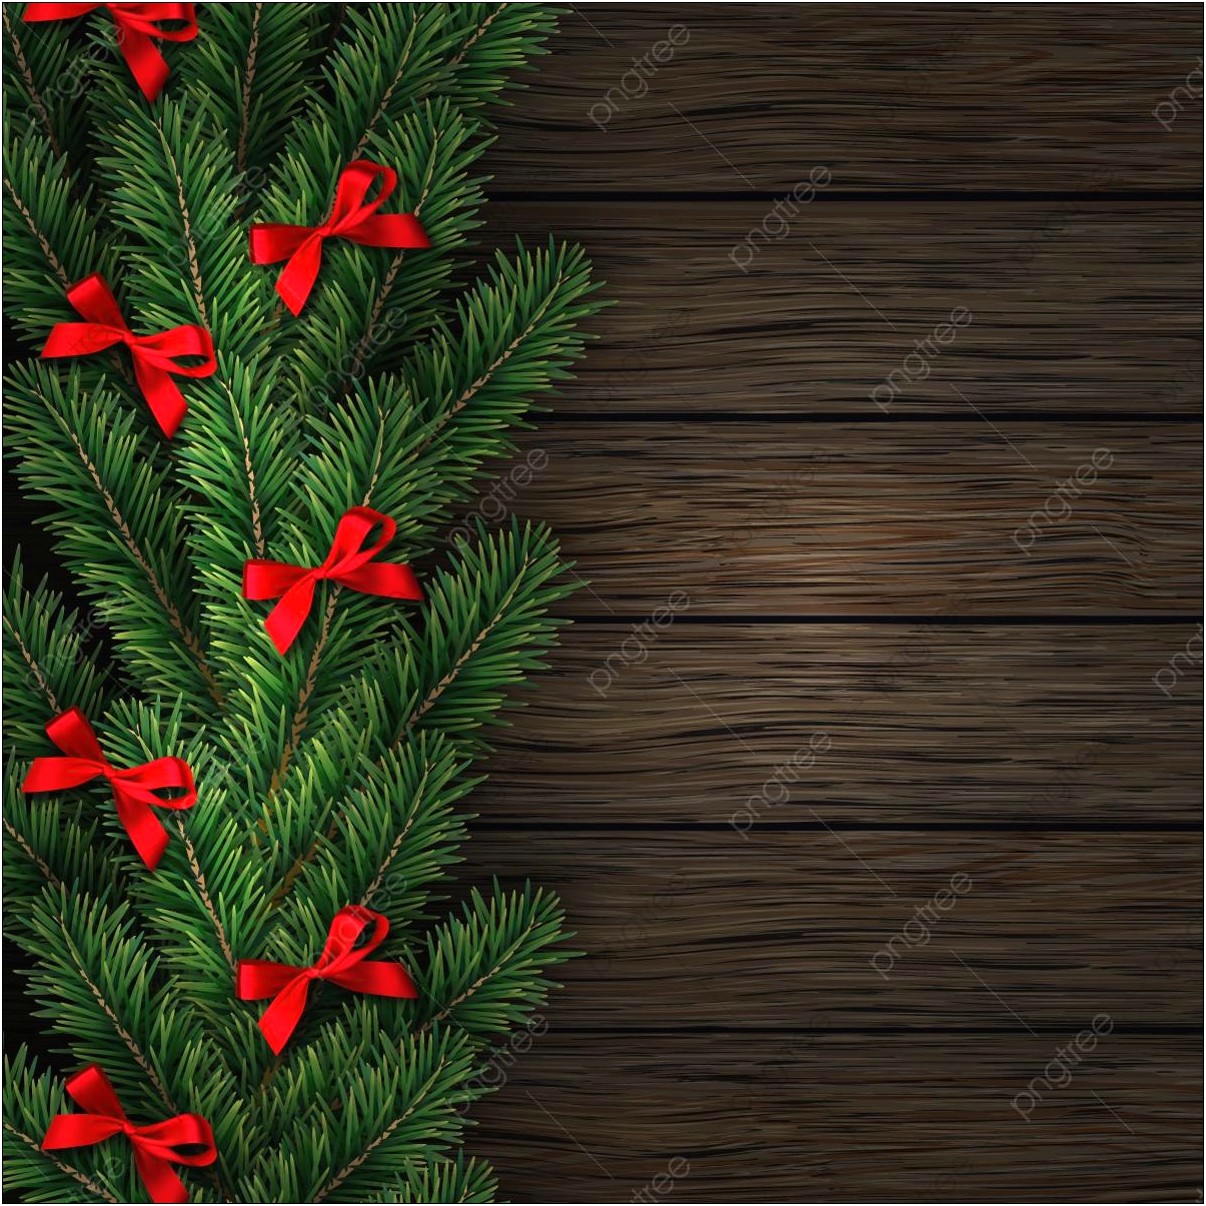 Rustic Christmas Card Template Free Download